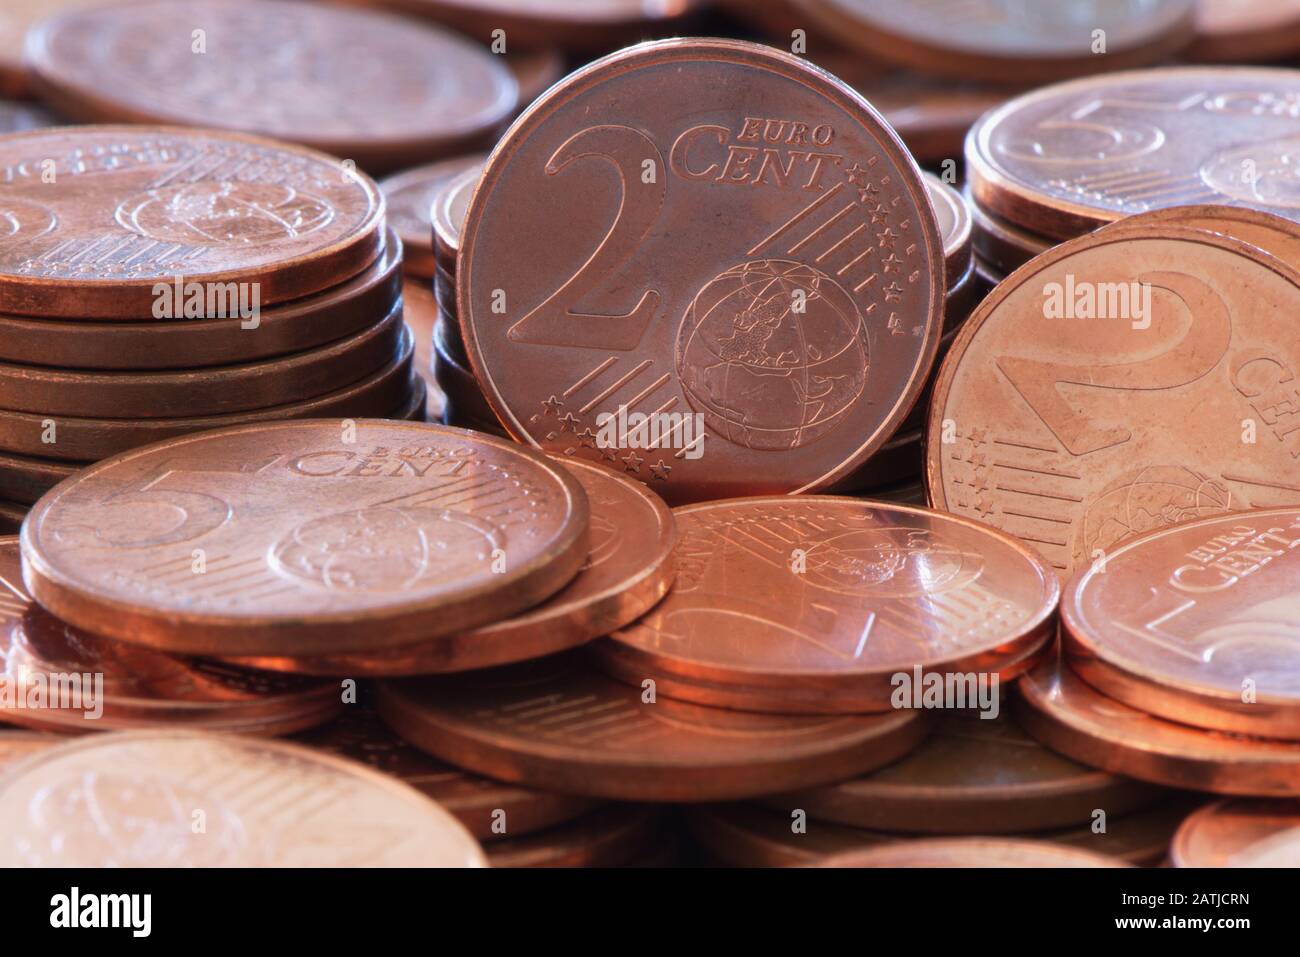 According to media reports, the new EU Commission chief Ursula von der Leyen plans to abolish all 1 and 2 cent coins. Stock Photo